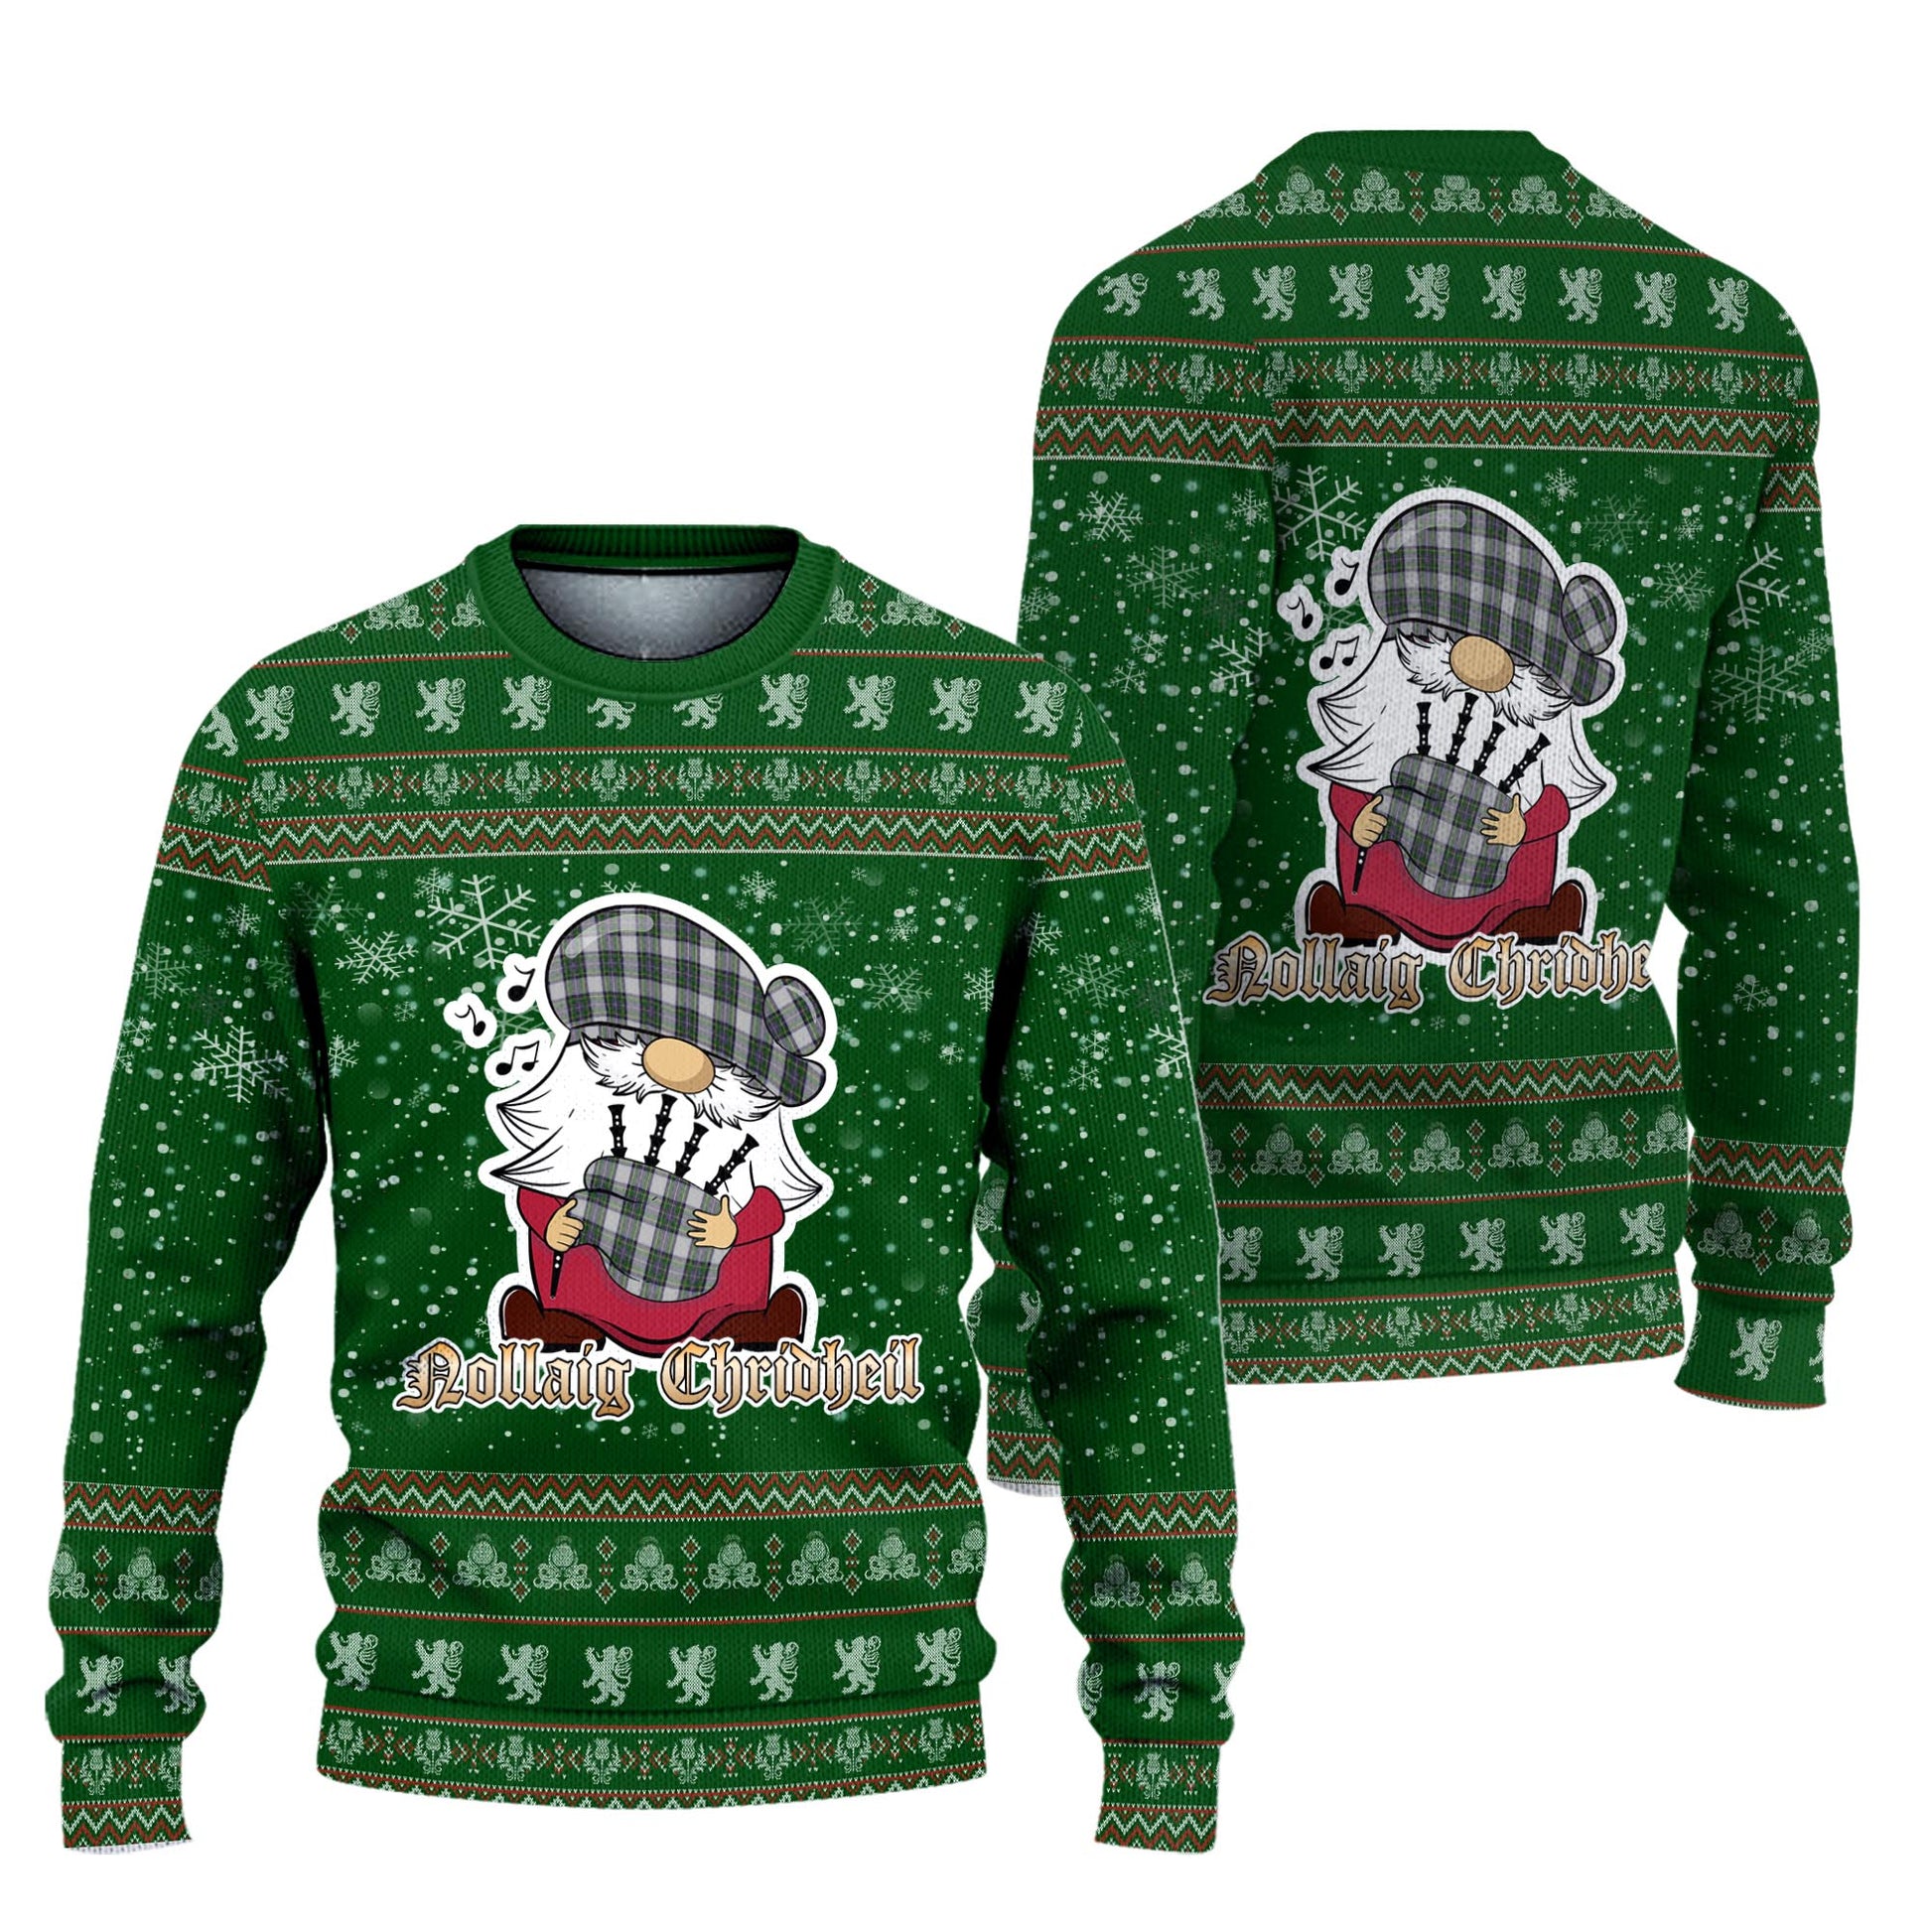 Pritchard Clan Christmas Family Knitted Sweater with Funny Gnome Playing Bagpipes Unisex Green - Tartanvibesclothing